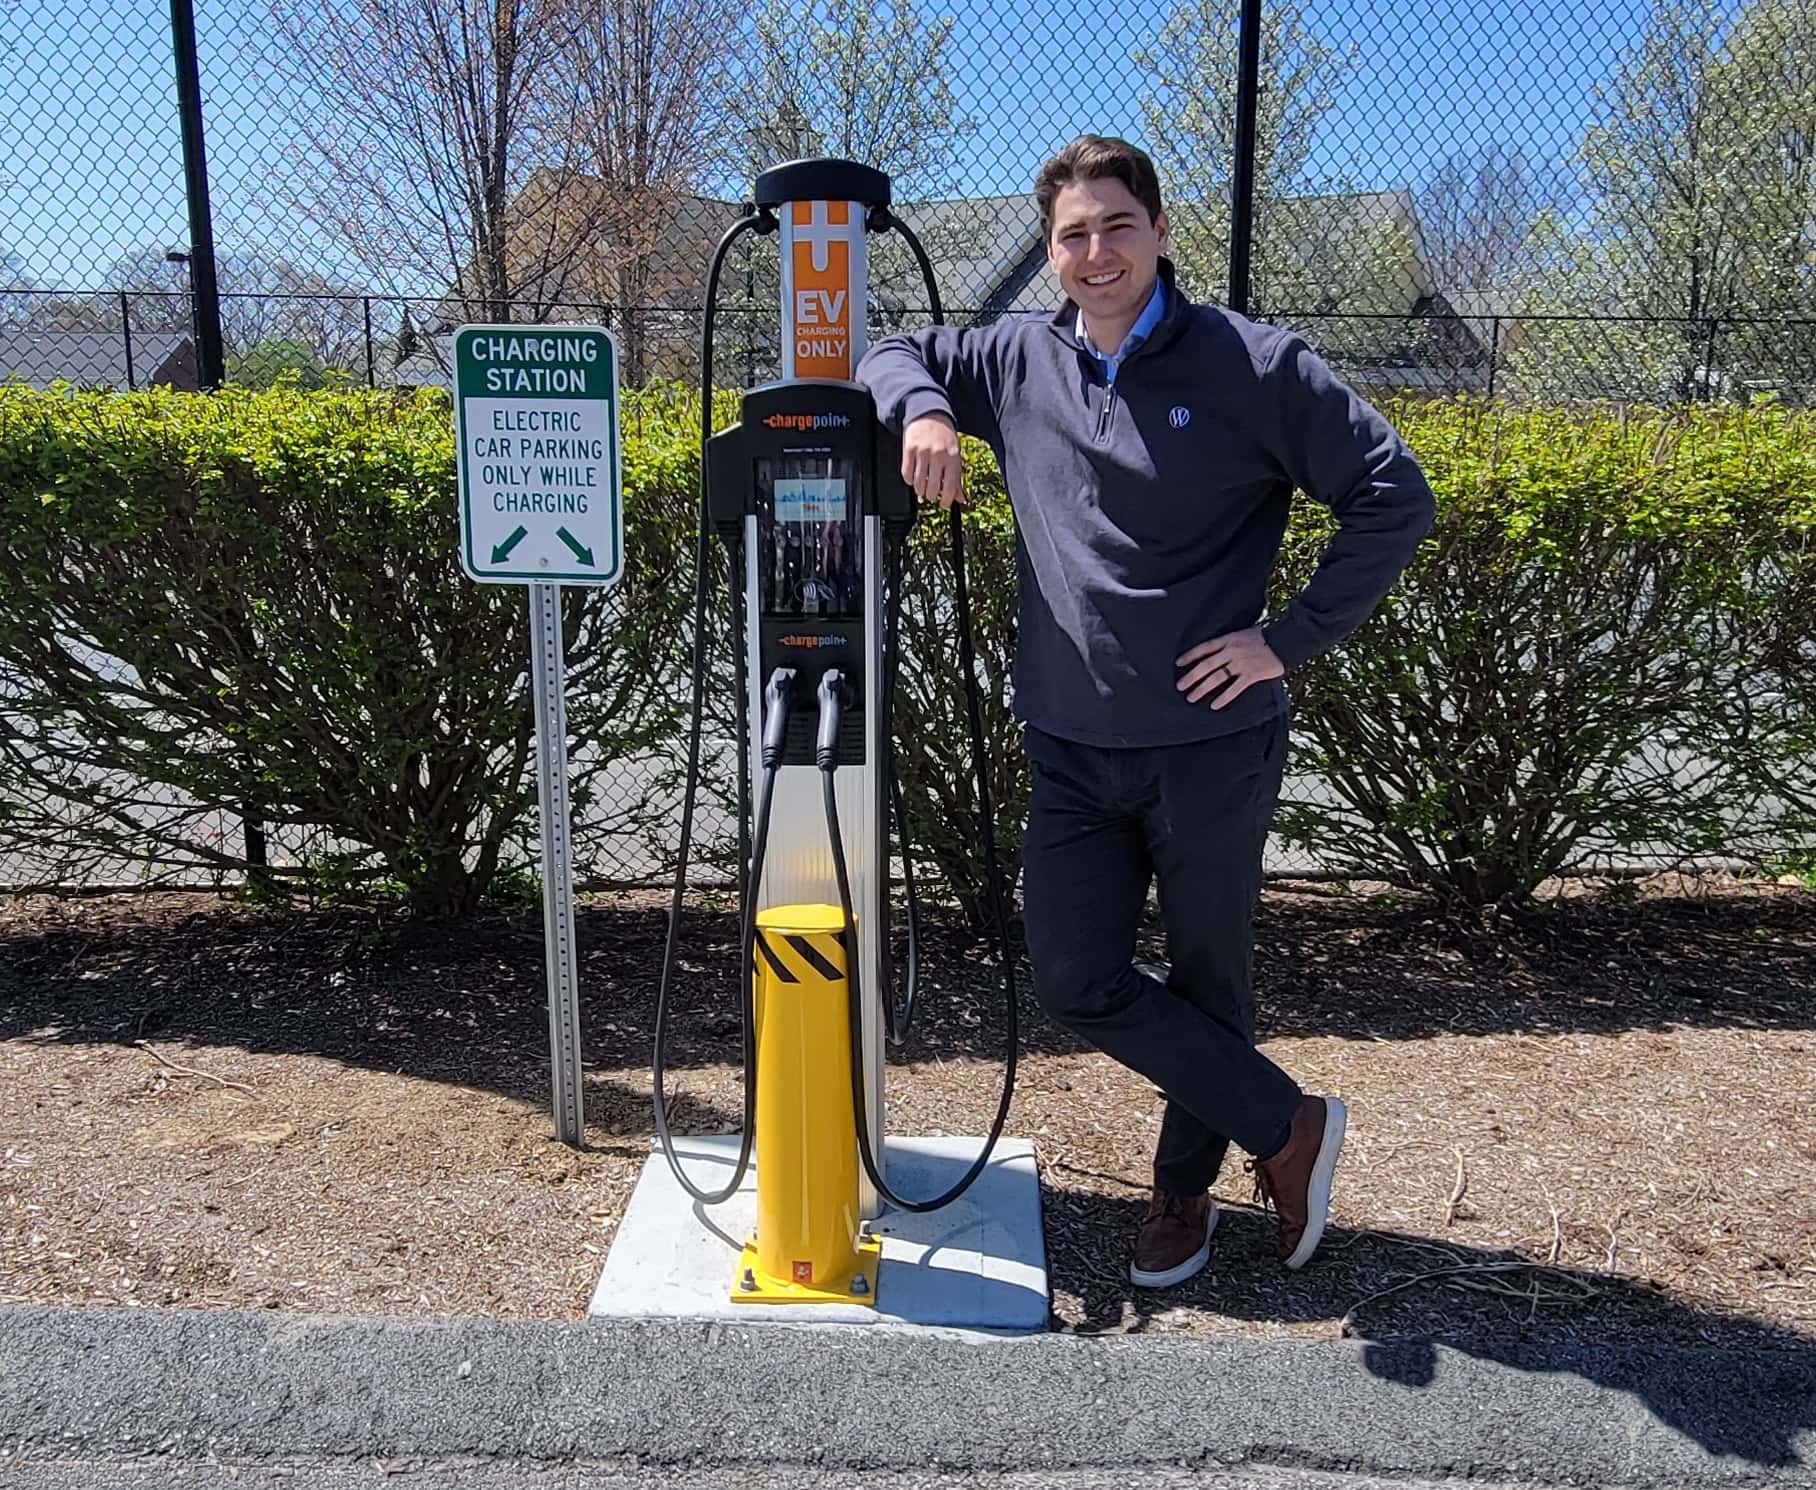 Electric vehicle charging is a must for apartment and condo dwellers